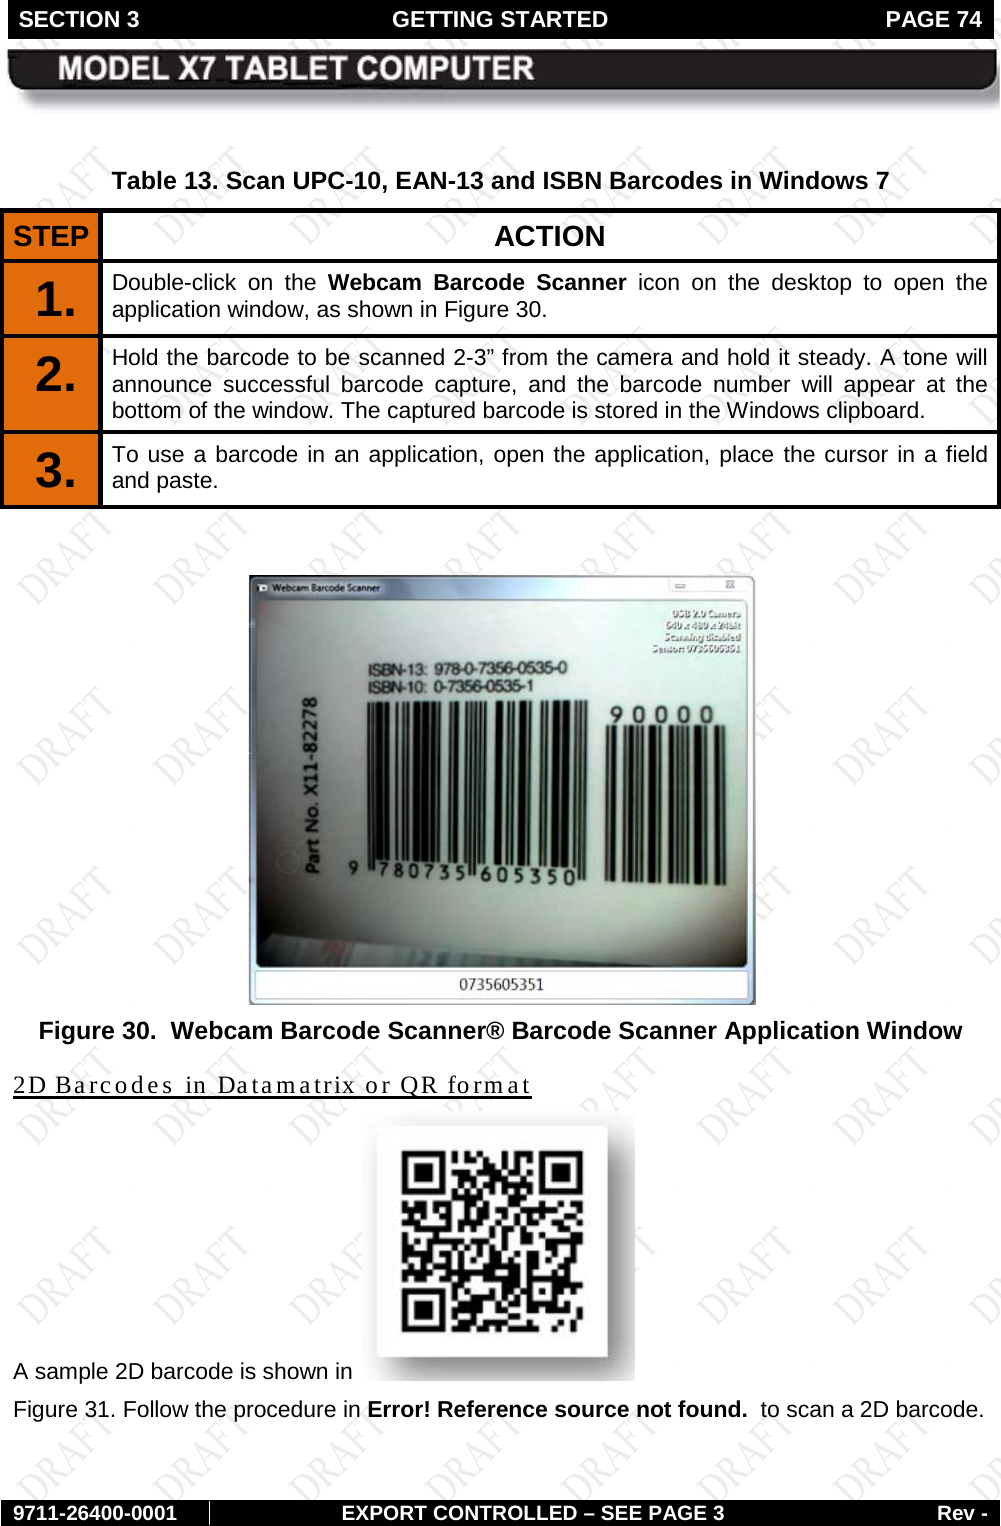 SECTION 3 GETTING STARTED  PAGE 74        9711-26400-0001 EXPORT CONTROLLED – SEE PAGE 3 Rev -  Table 13. Scan UPC-10, EAN-13 and ISBN Barcodes in Windows 7 STEP  ACTION 1.  Double-click on the Webcam Barcode Scanner icon on the desktop to open the application window, as shown in Figure 30.  2.  Hold the barcode to be scanned 2-3” from the camera and hold it steady. A tone will announce successful barcode capture, and the barcode number will appear at the bottom of the window. The captured barcode is stored in the Windows clipboard. 3.  To use a barcode in an application, open the application, place the cursor in a field and paste.    Figure 30.  Webcam Barcode Scanner® Barcode Scanner Application Window 2D Barcodes in Datamatrix or QR format A sample 2D barcode is shown in   Figure 31. Follow the procedure in Error! Reference source not found.  to scan a 2D barcode. 